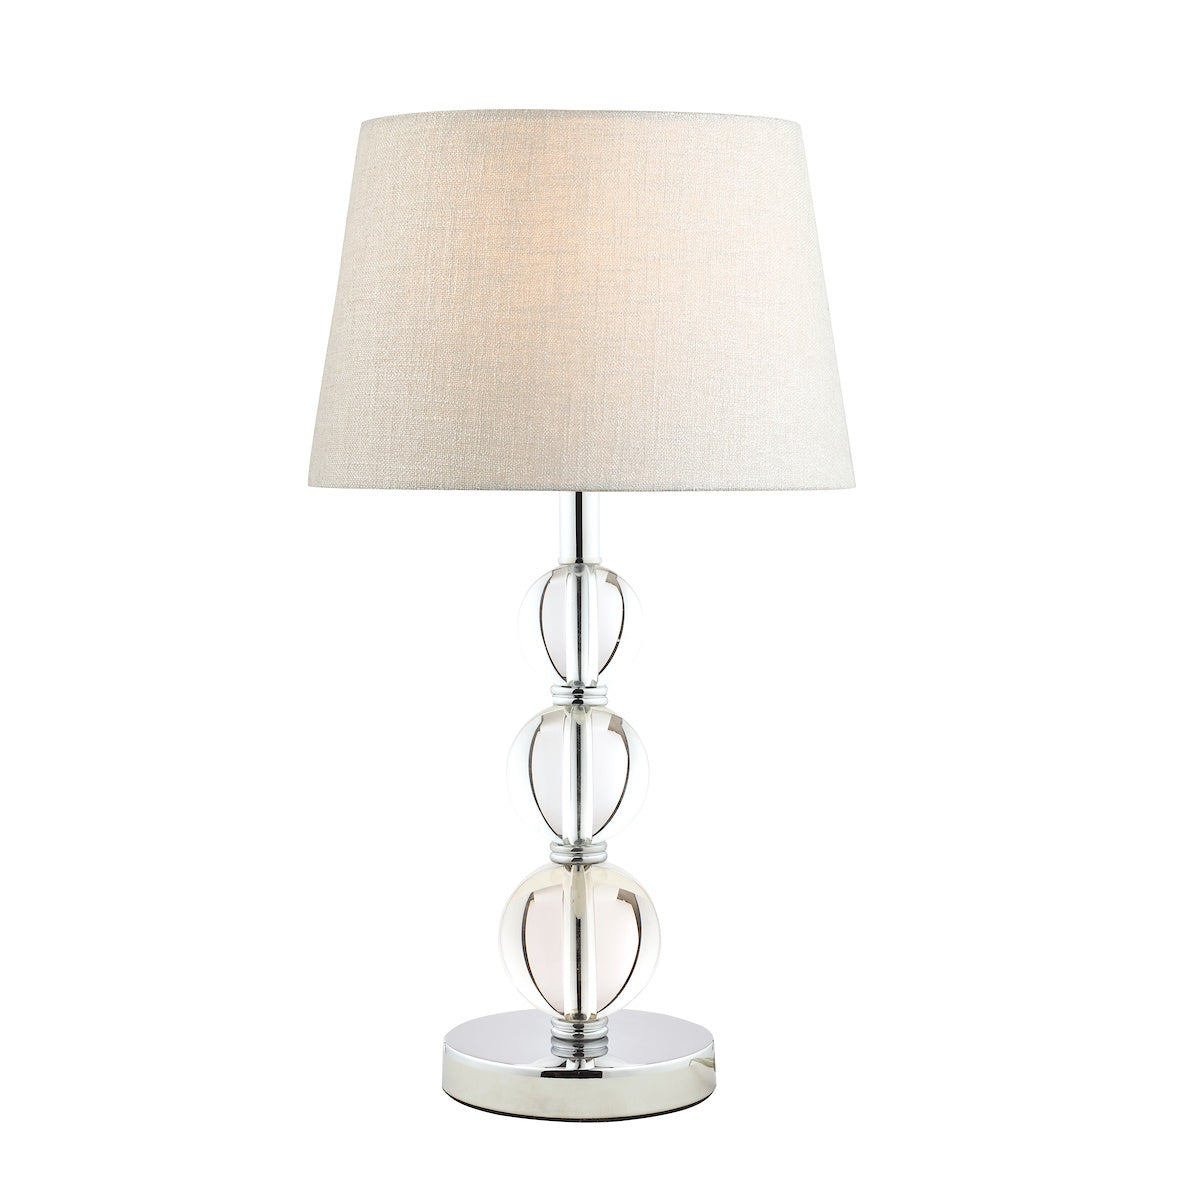 Laura Ashley Selby Polished Nickel & Glass Ball LA3732149-Q Table Lamp Base Large